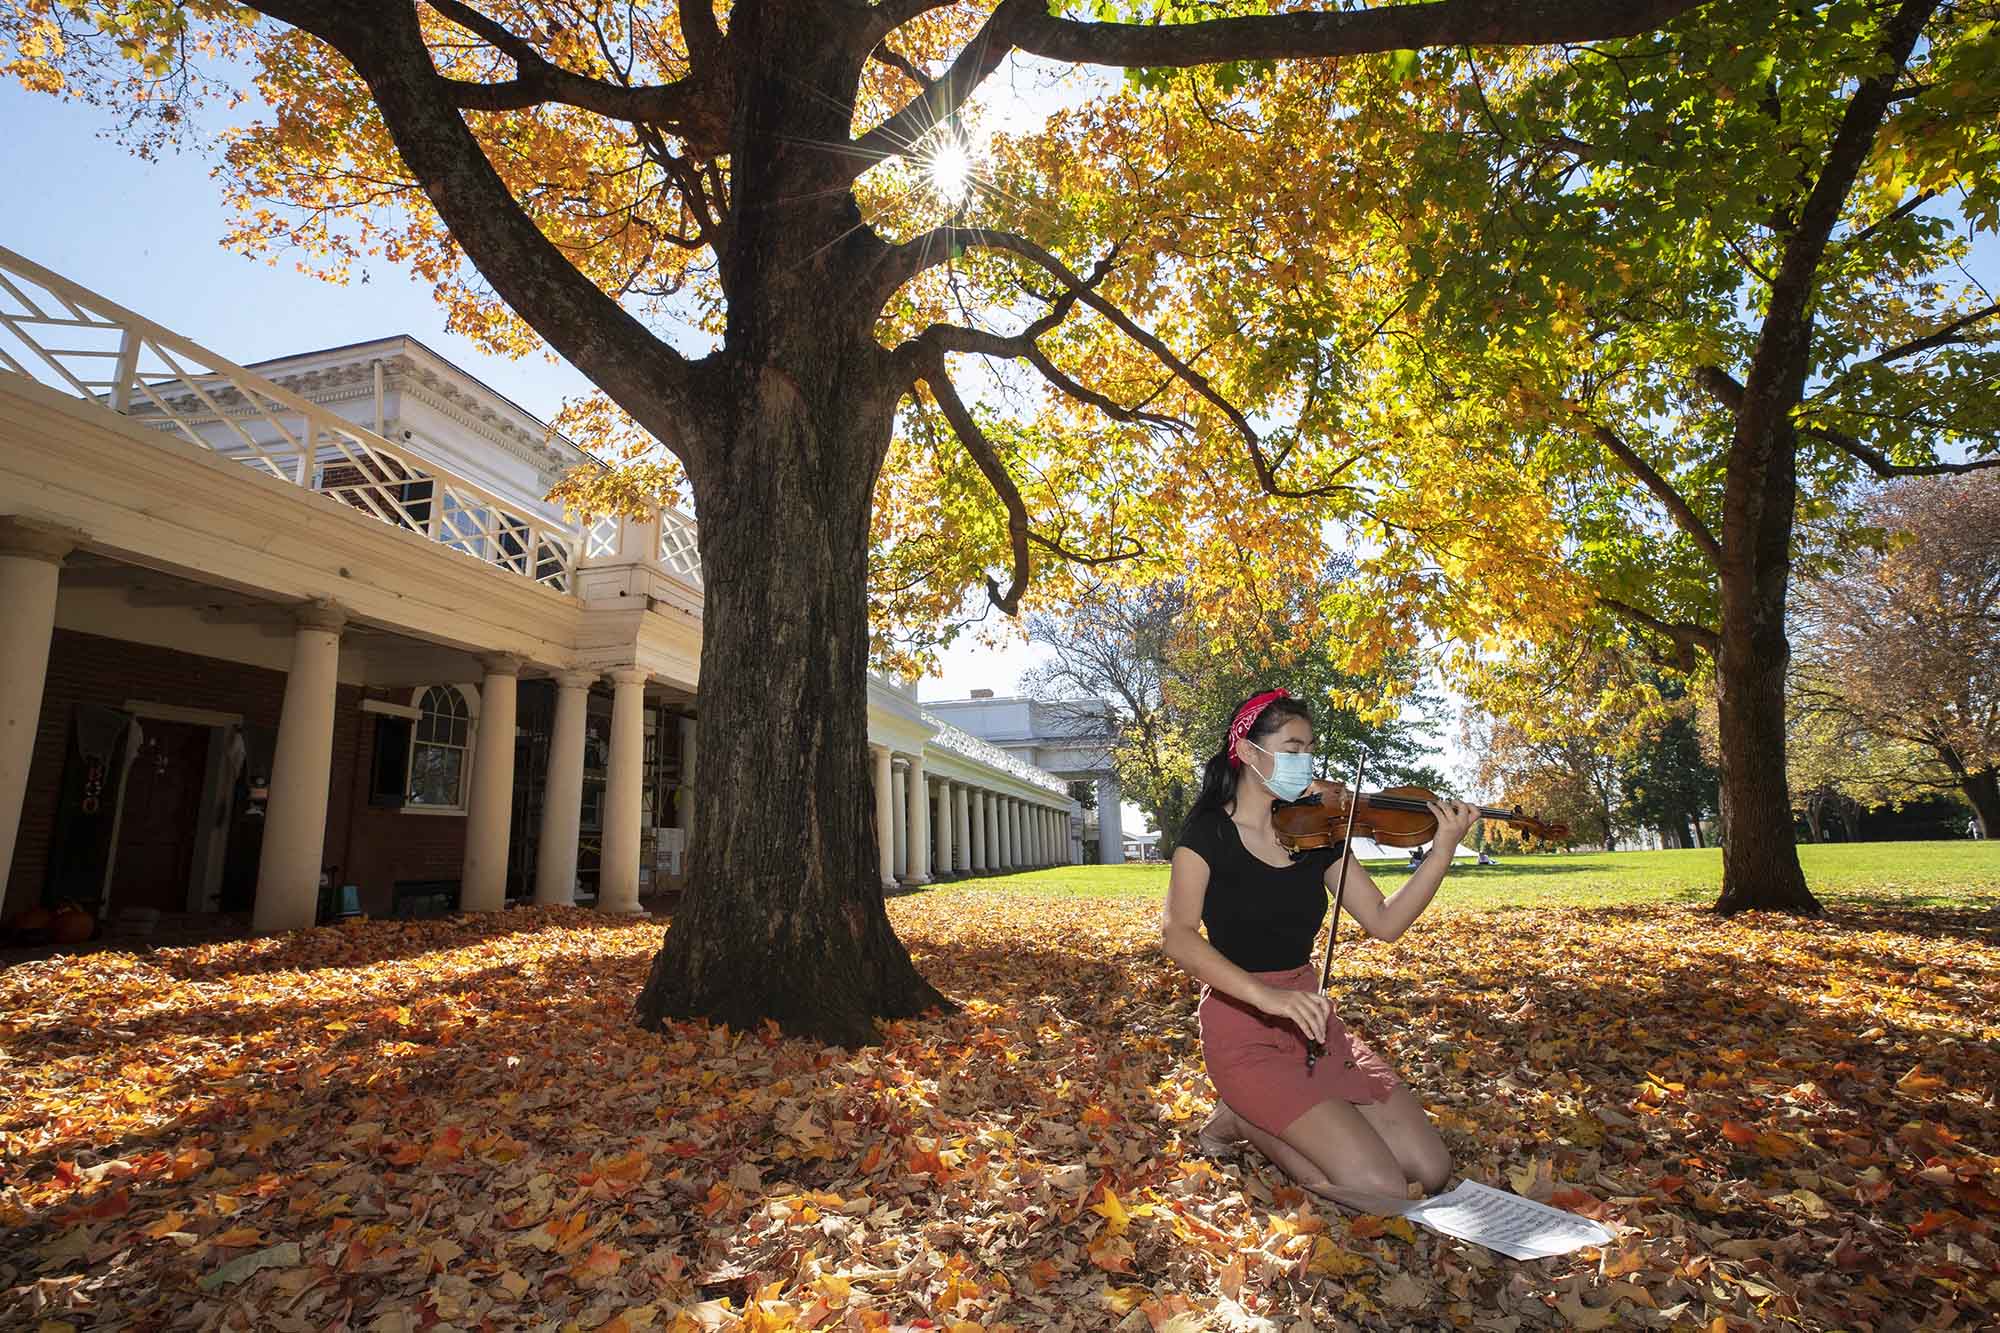 Christina Ngo, sitting on the Lawn playing violin in a pile of leaves